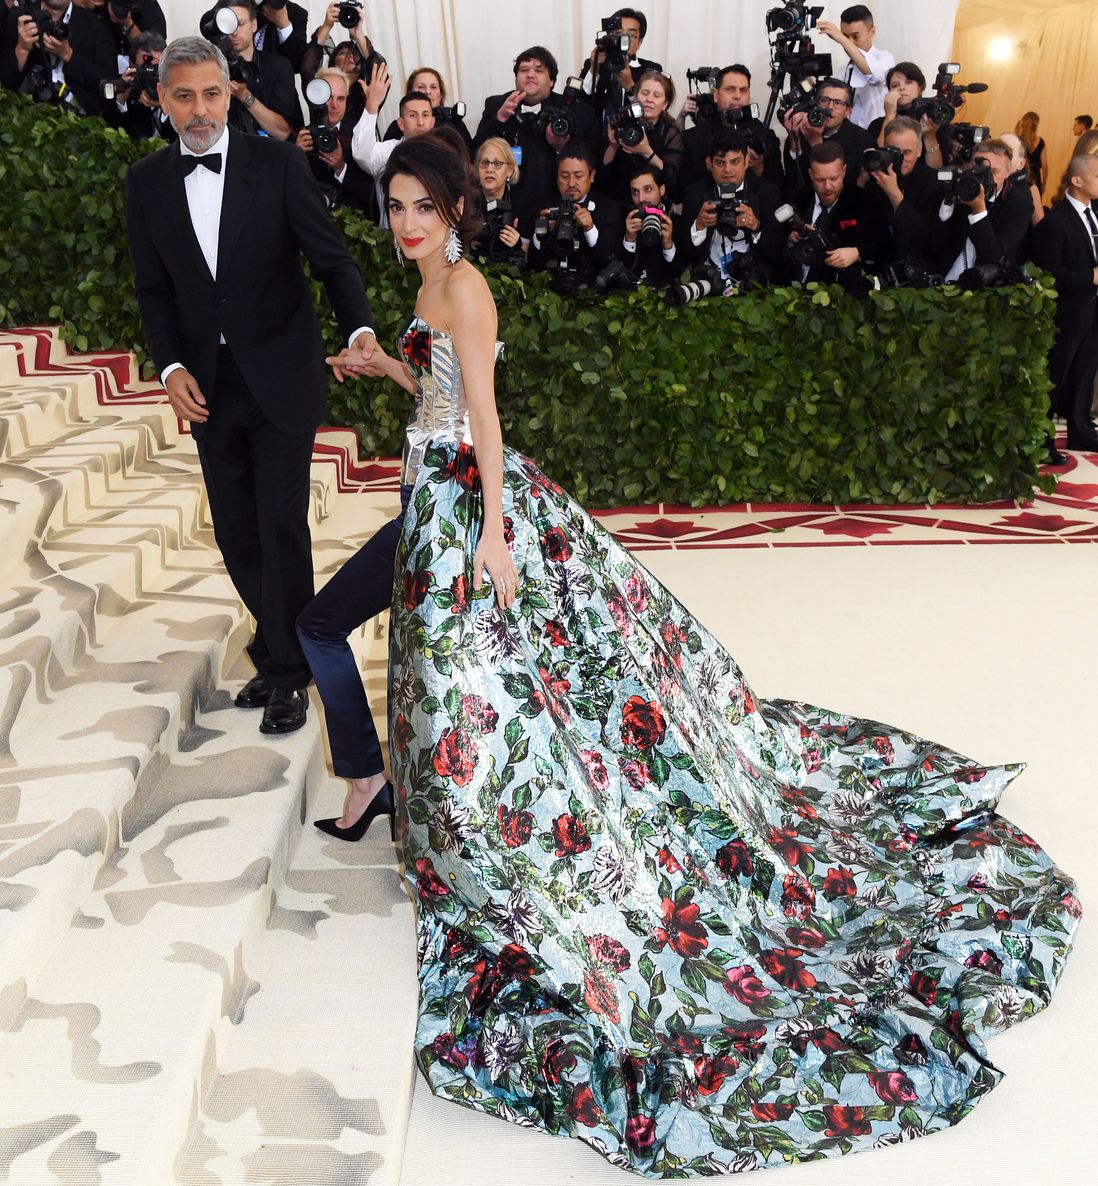 Amal Clooney and some guy named George (Charles Sykes/Invision/AP/REX/Shutterstock)